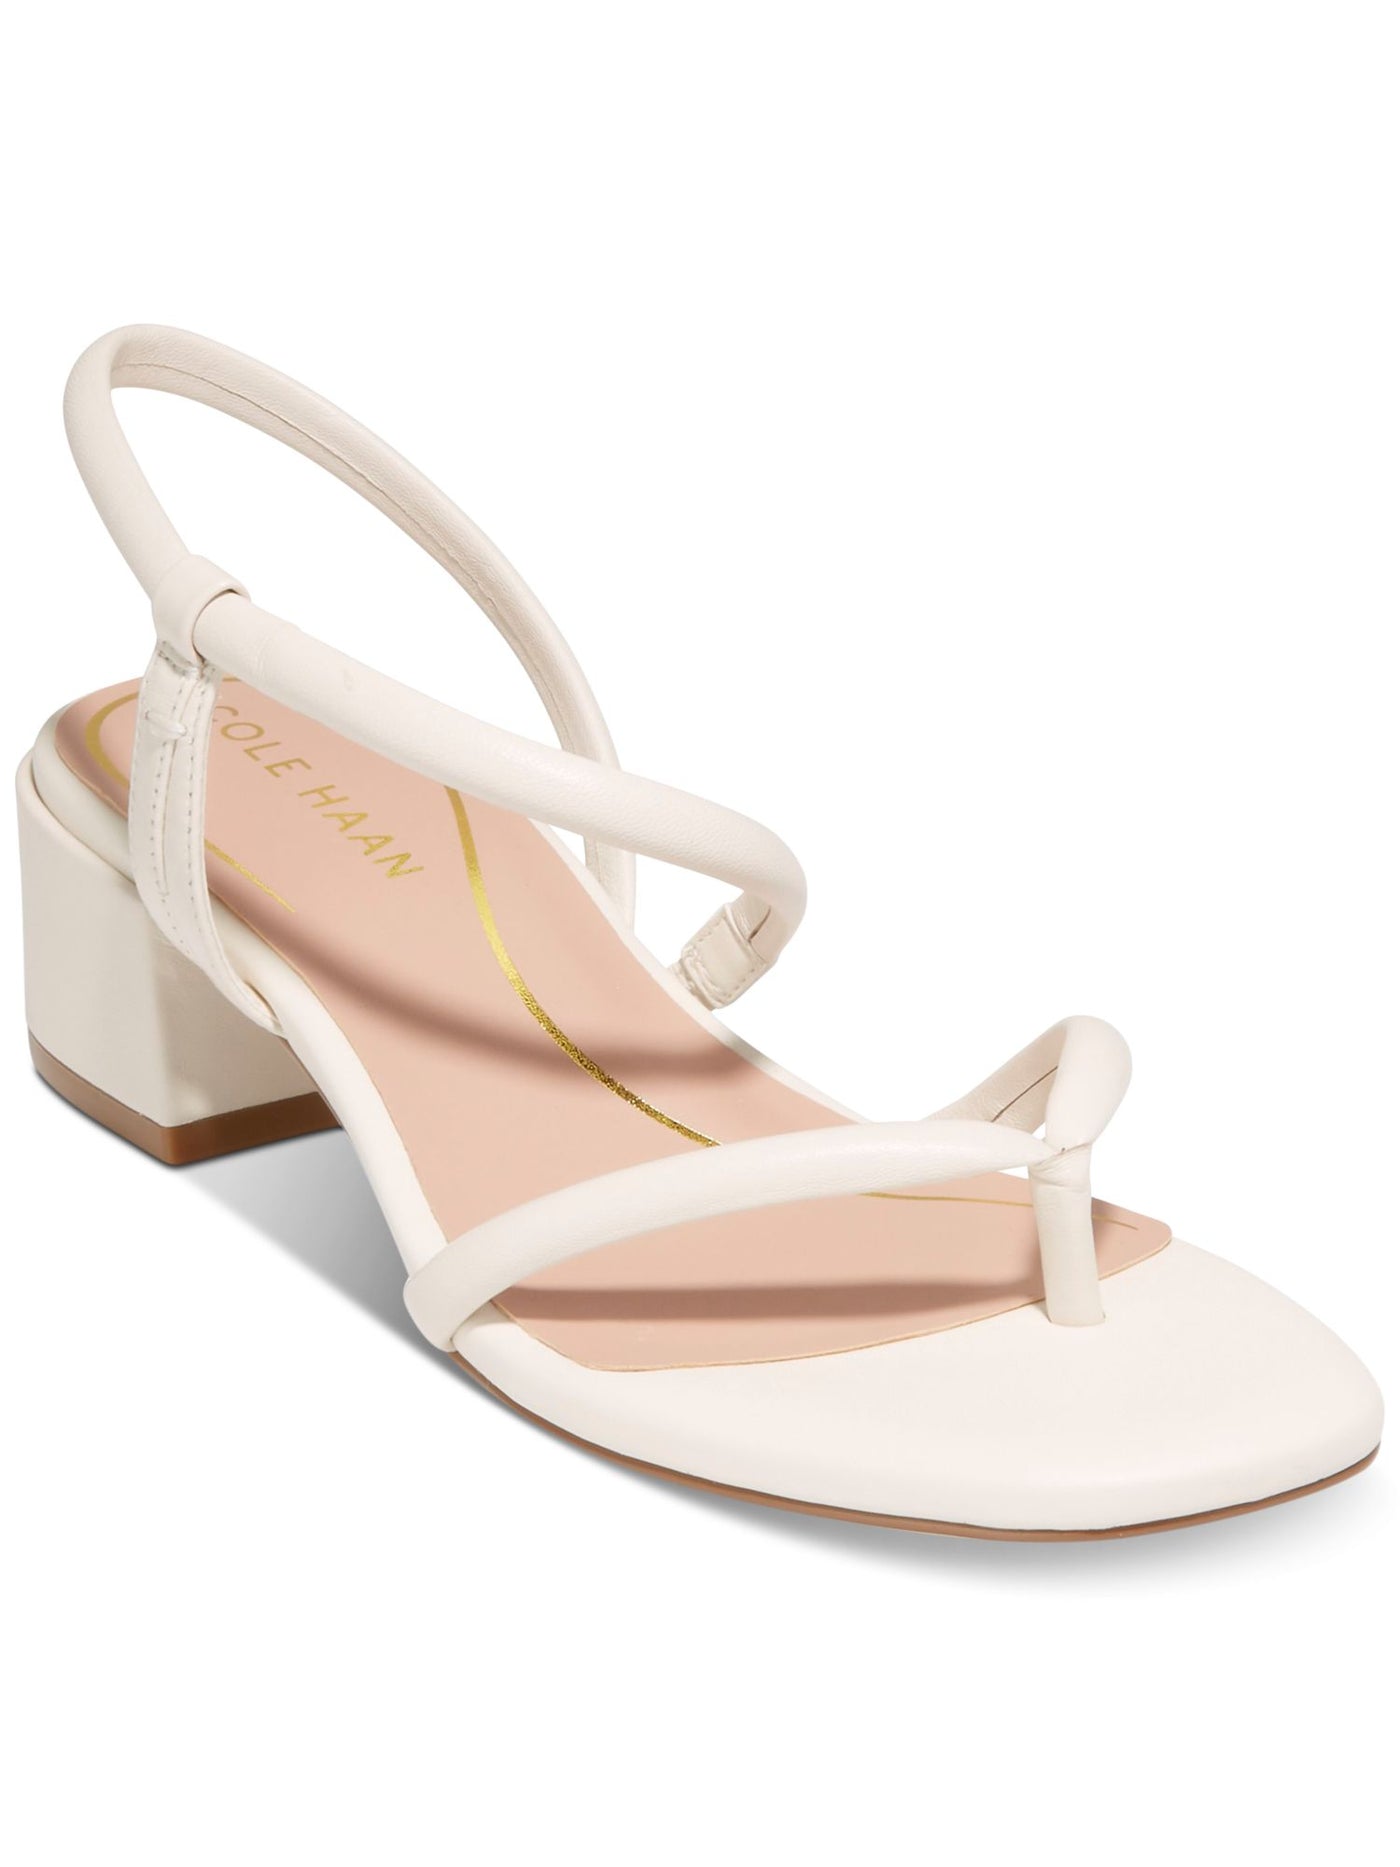 COLE HAAN Womens Ivory Cushioned Arch Support Asymmetrical Calli Round Toe Flare Slip On Leather Dress Thong Sandals Shoes 9 B